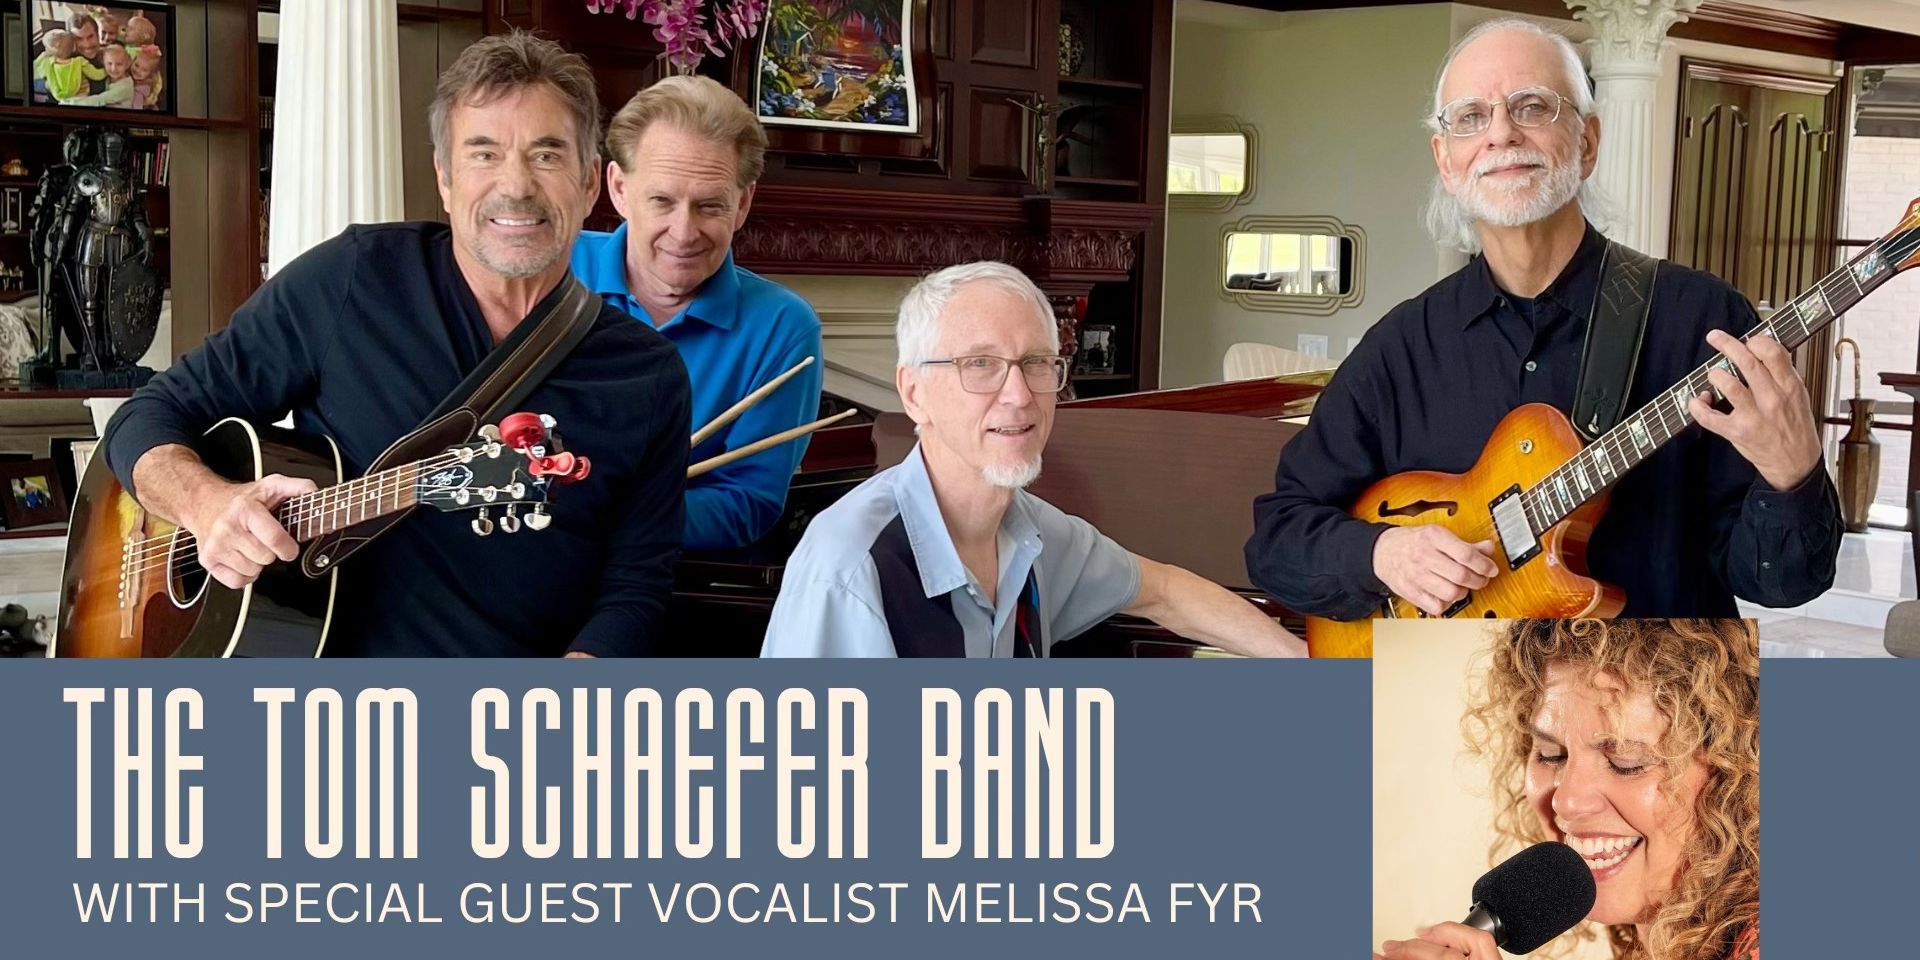 The Tom Schaefer Band with special guest vocalist Melissa Fyr promotional image